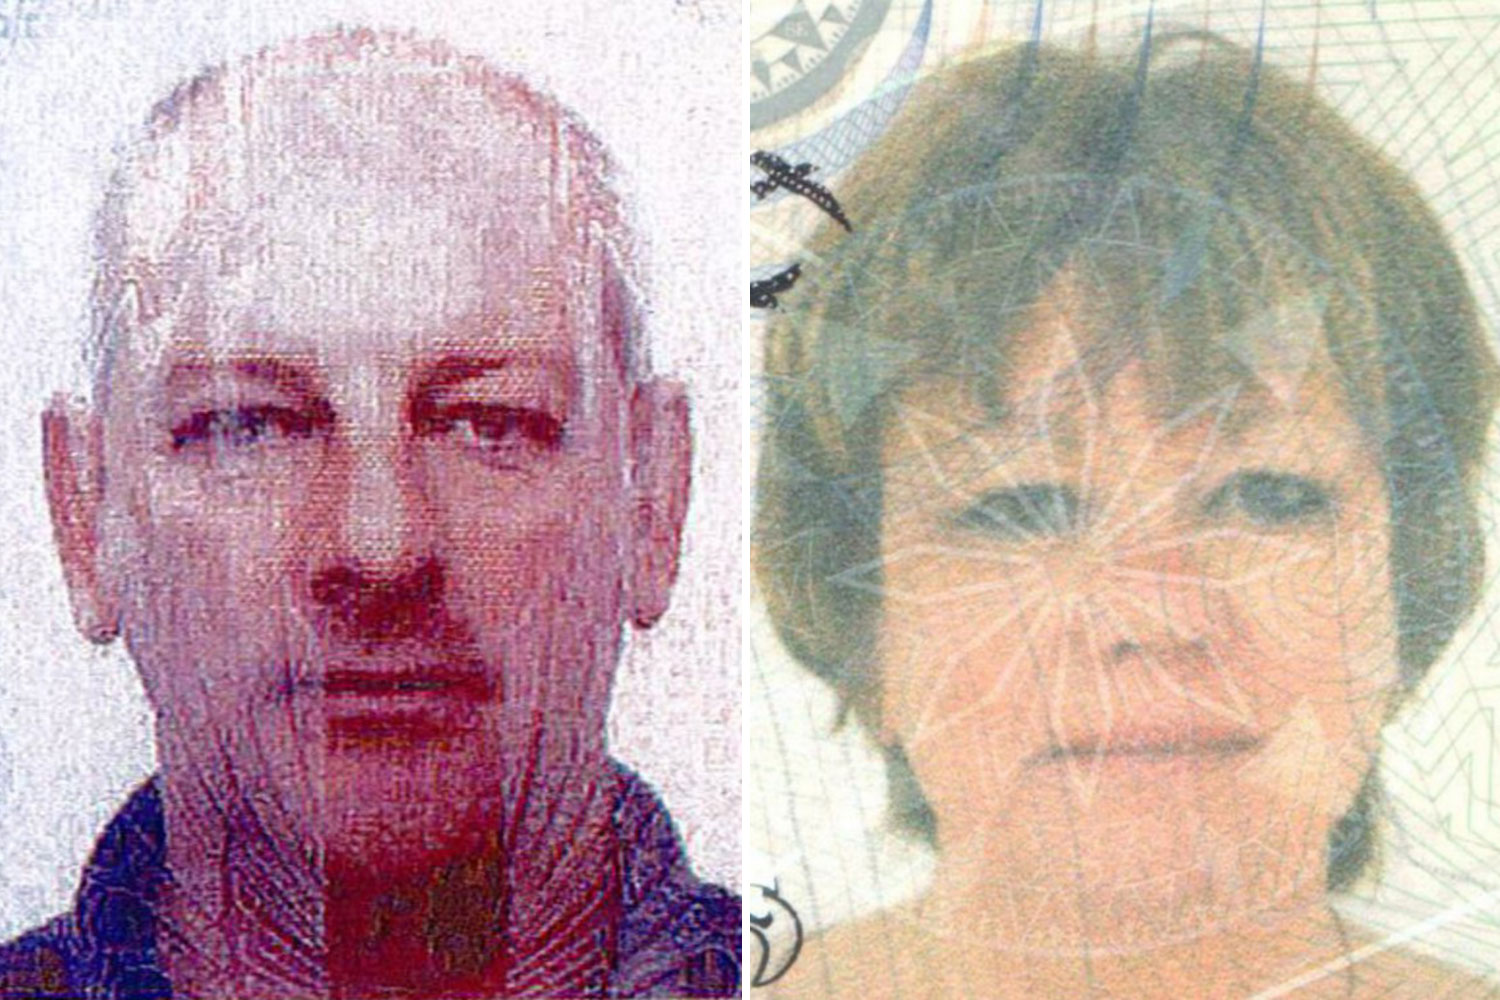 Pension fraudsters who duped 245 victims out of £13.7m life savings are jailed